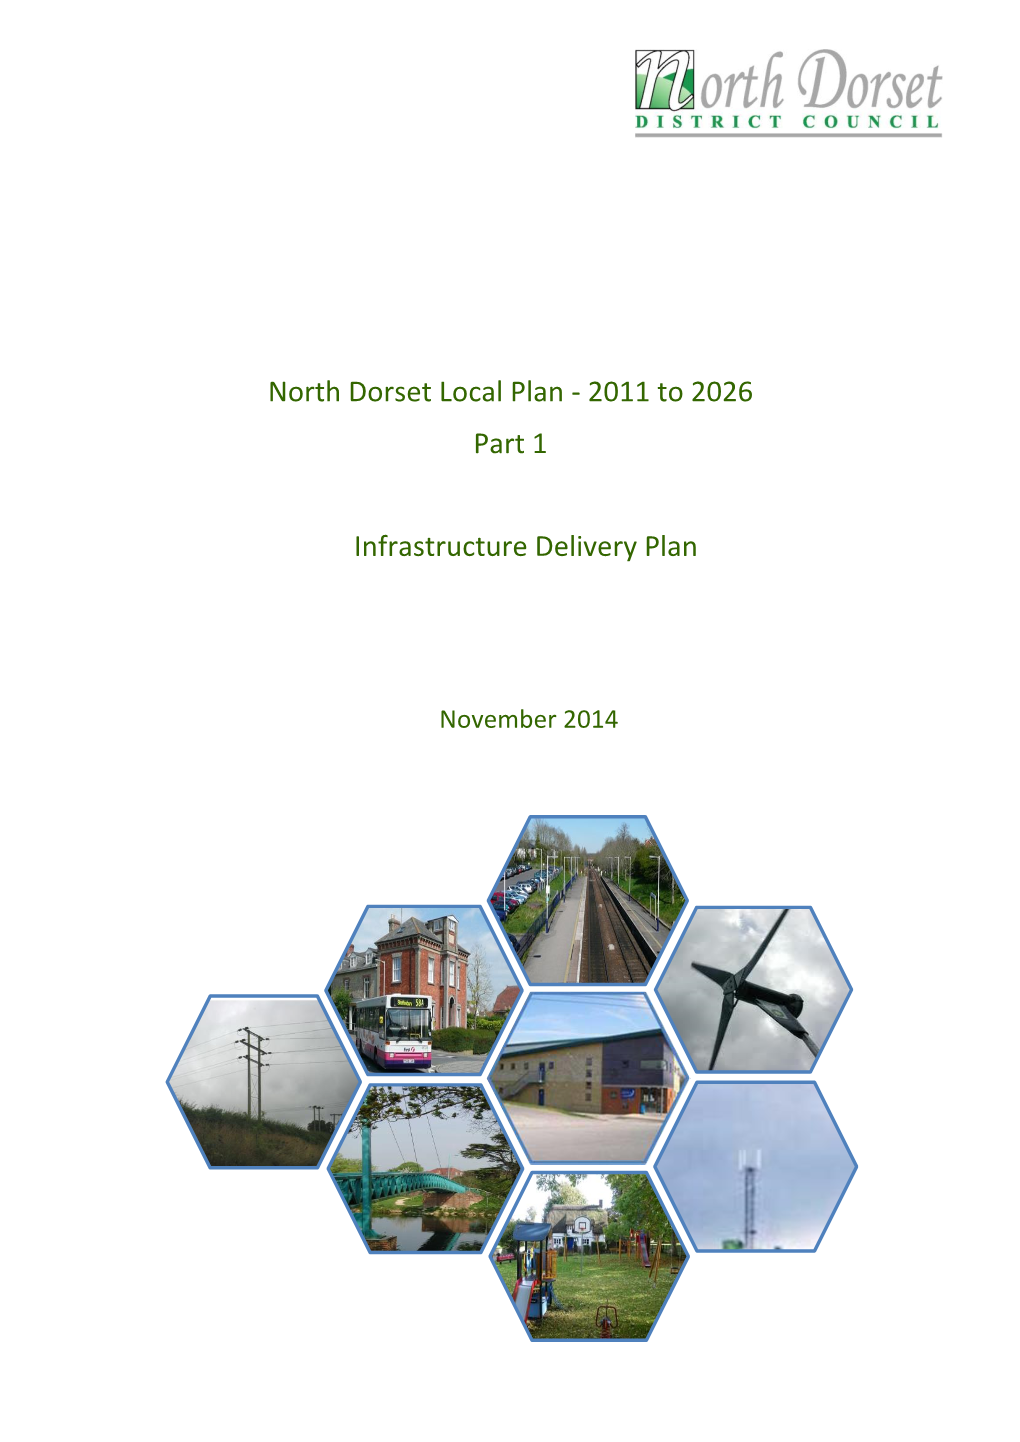 North Dorset Infrastructure Delivery Plan